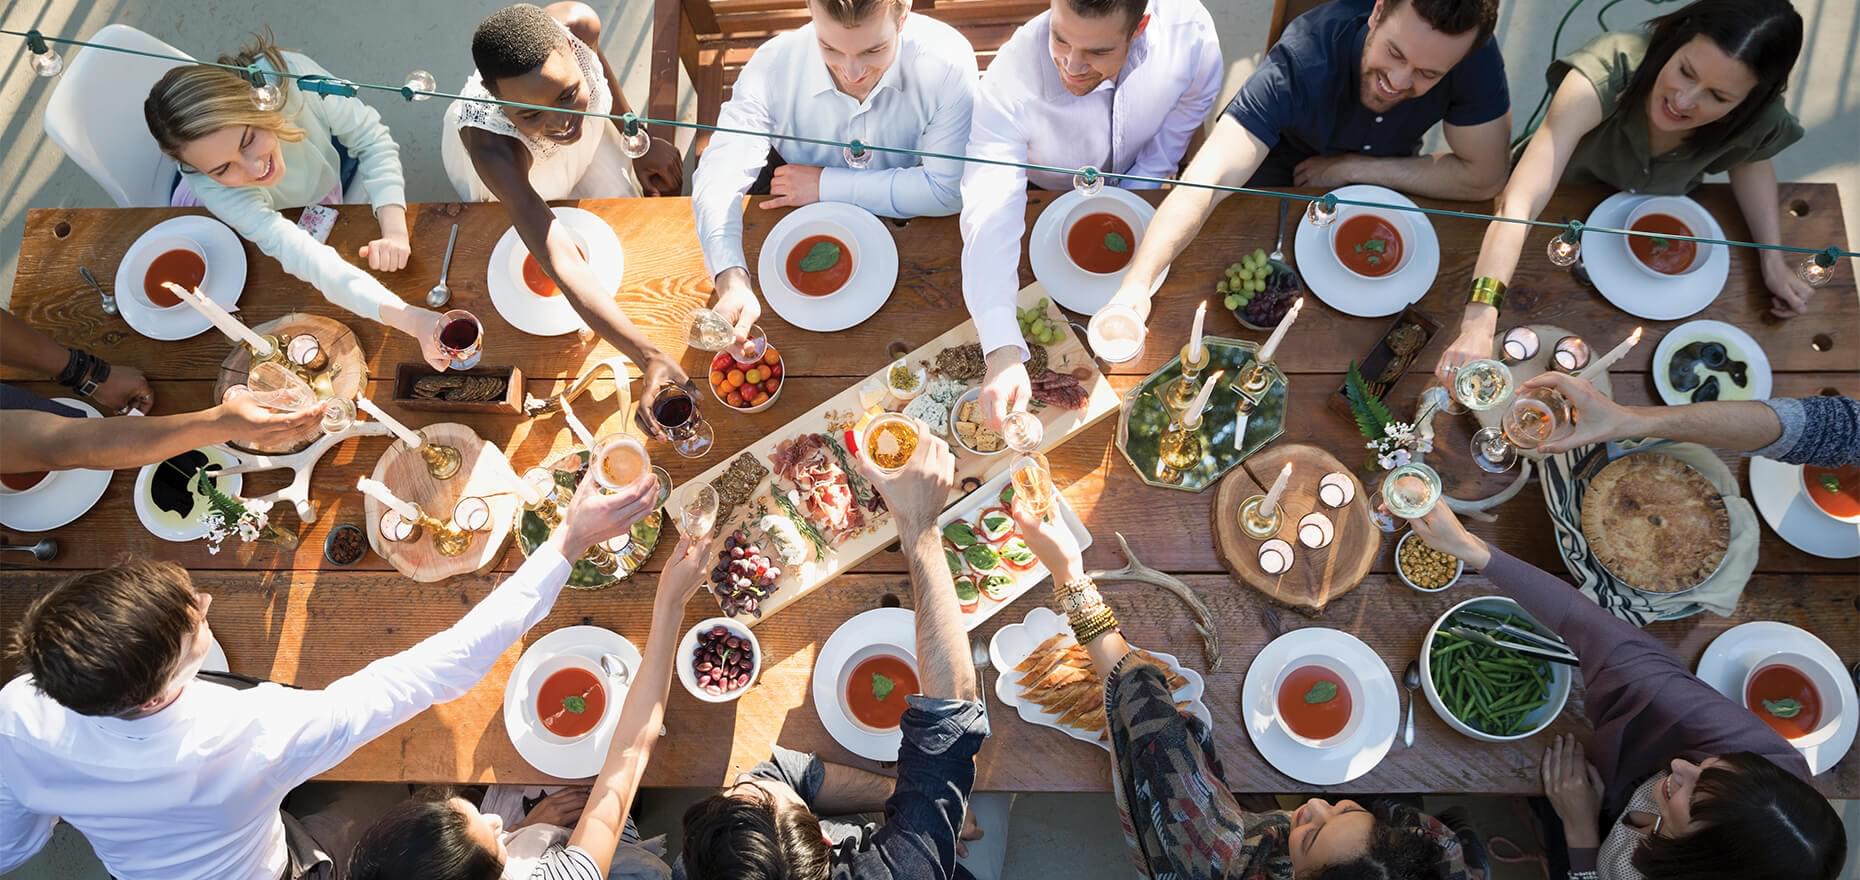 Overhead view of group of people toasting a meal